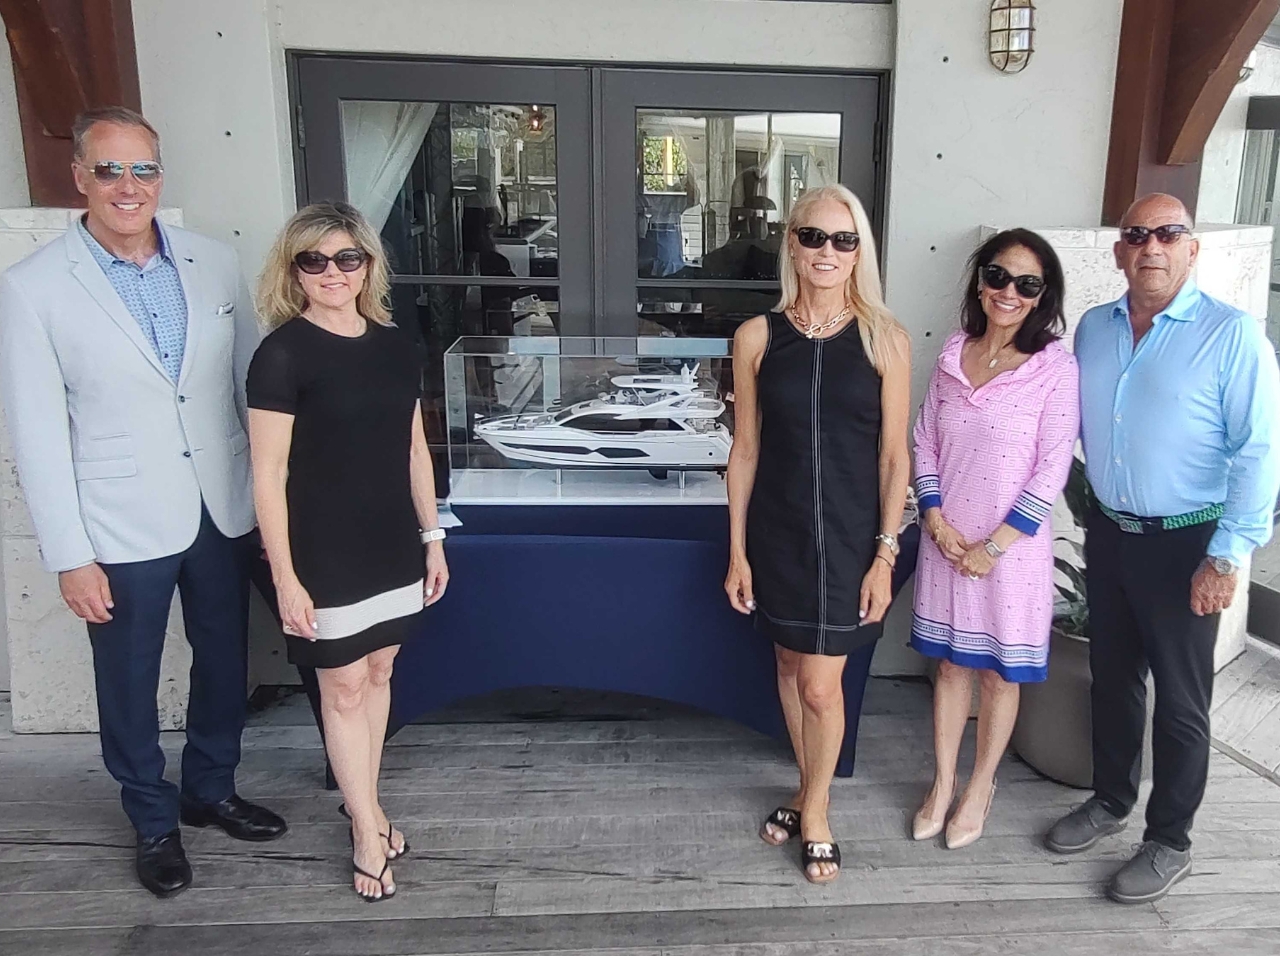 Exclusive Yachts Executive Team at Hamilton Harbor Yacht Club<br />
Photo of Exclusive Yachts Executive Team, CEO Scott Stuckmann, CMO Julie Perry, Head of Sales Lou Clark, and Co-Founders Jacquie and Bill Charbonneau, also have Naples Nantucket Yacht Charter Group. Photo taken at the March 27 private launch party for Exclusive Yachts at the Hamilton Harbor Yacht Club in Naples Florida.